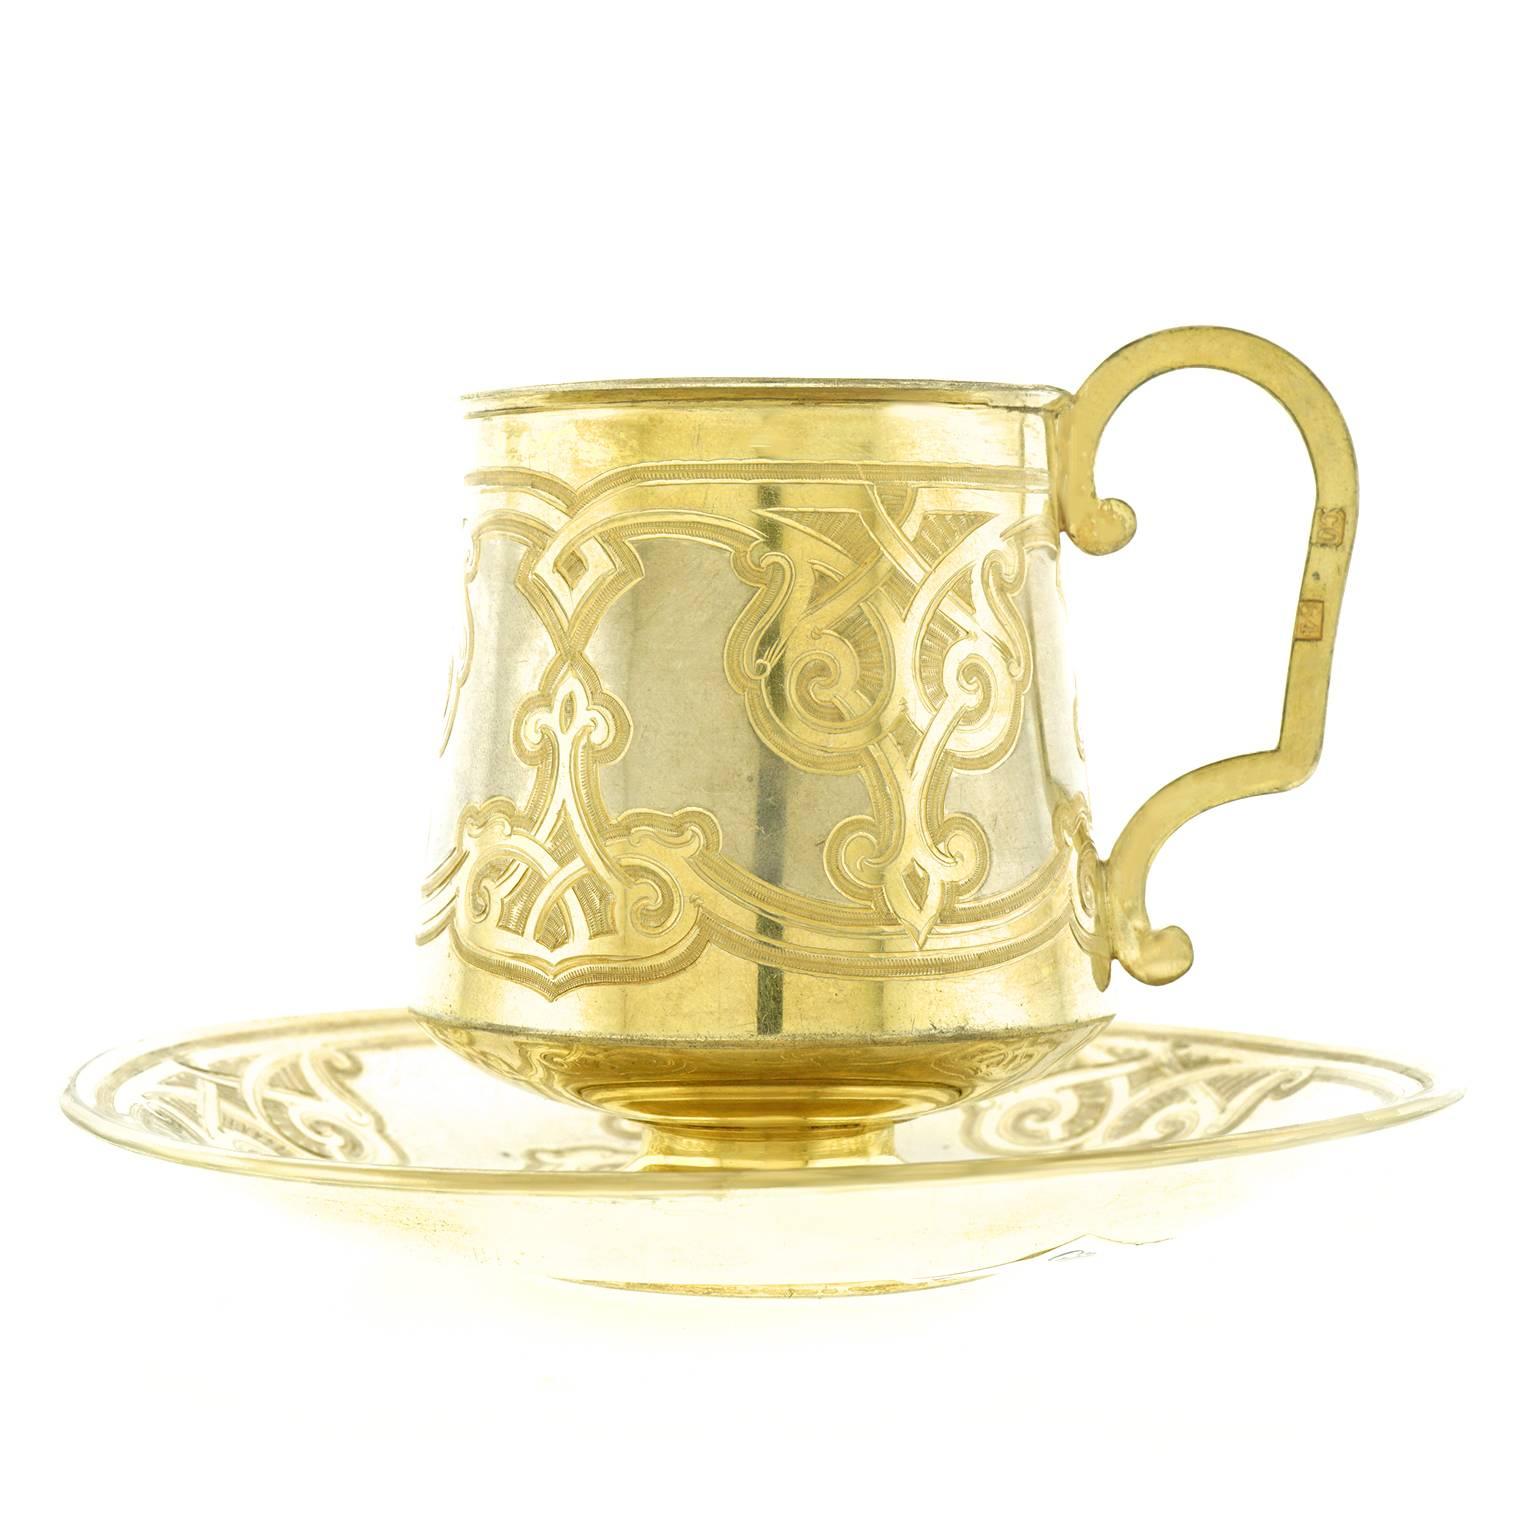 Russian Sterling Silver Parcel-Gilt Tea Cup and Saucer, circa 1875, Moscow Russia